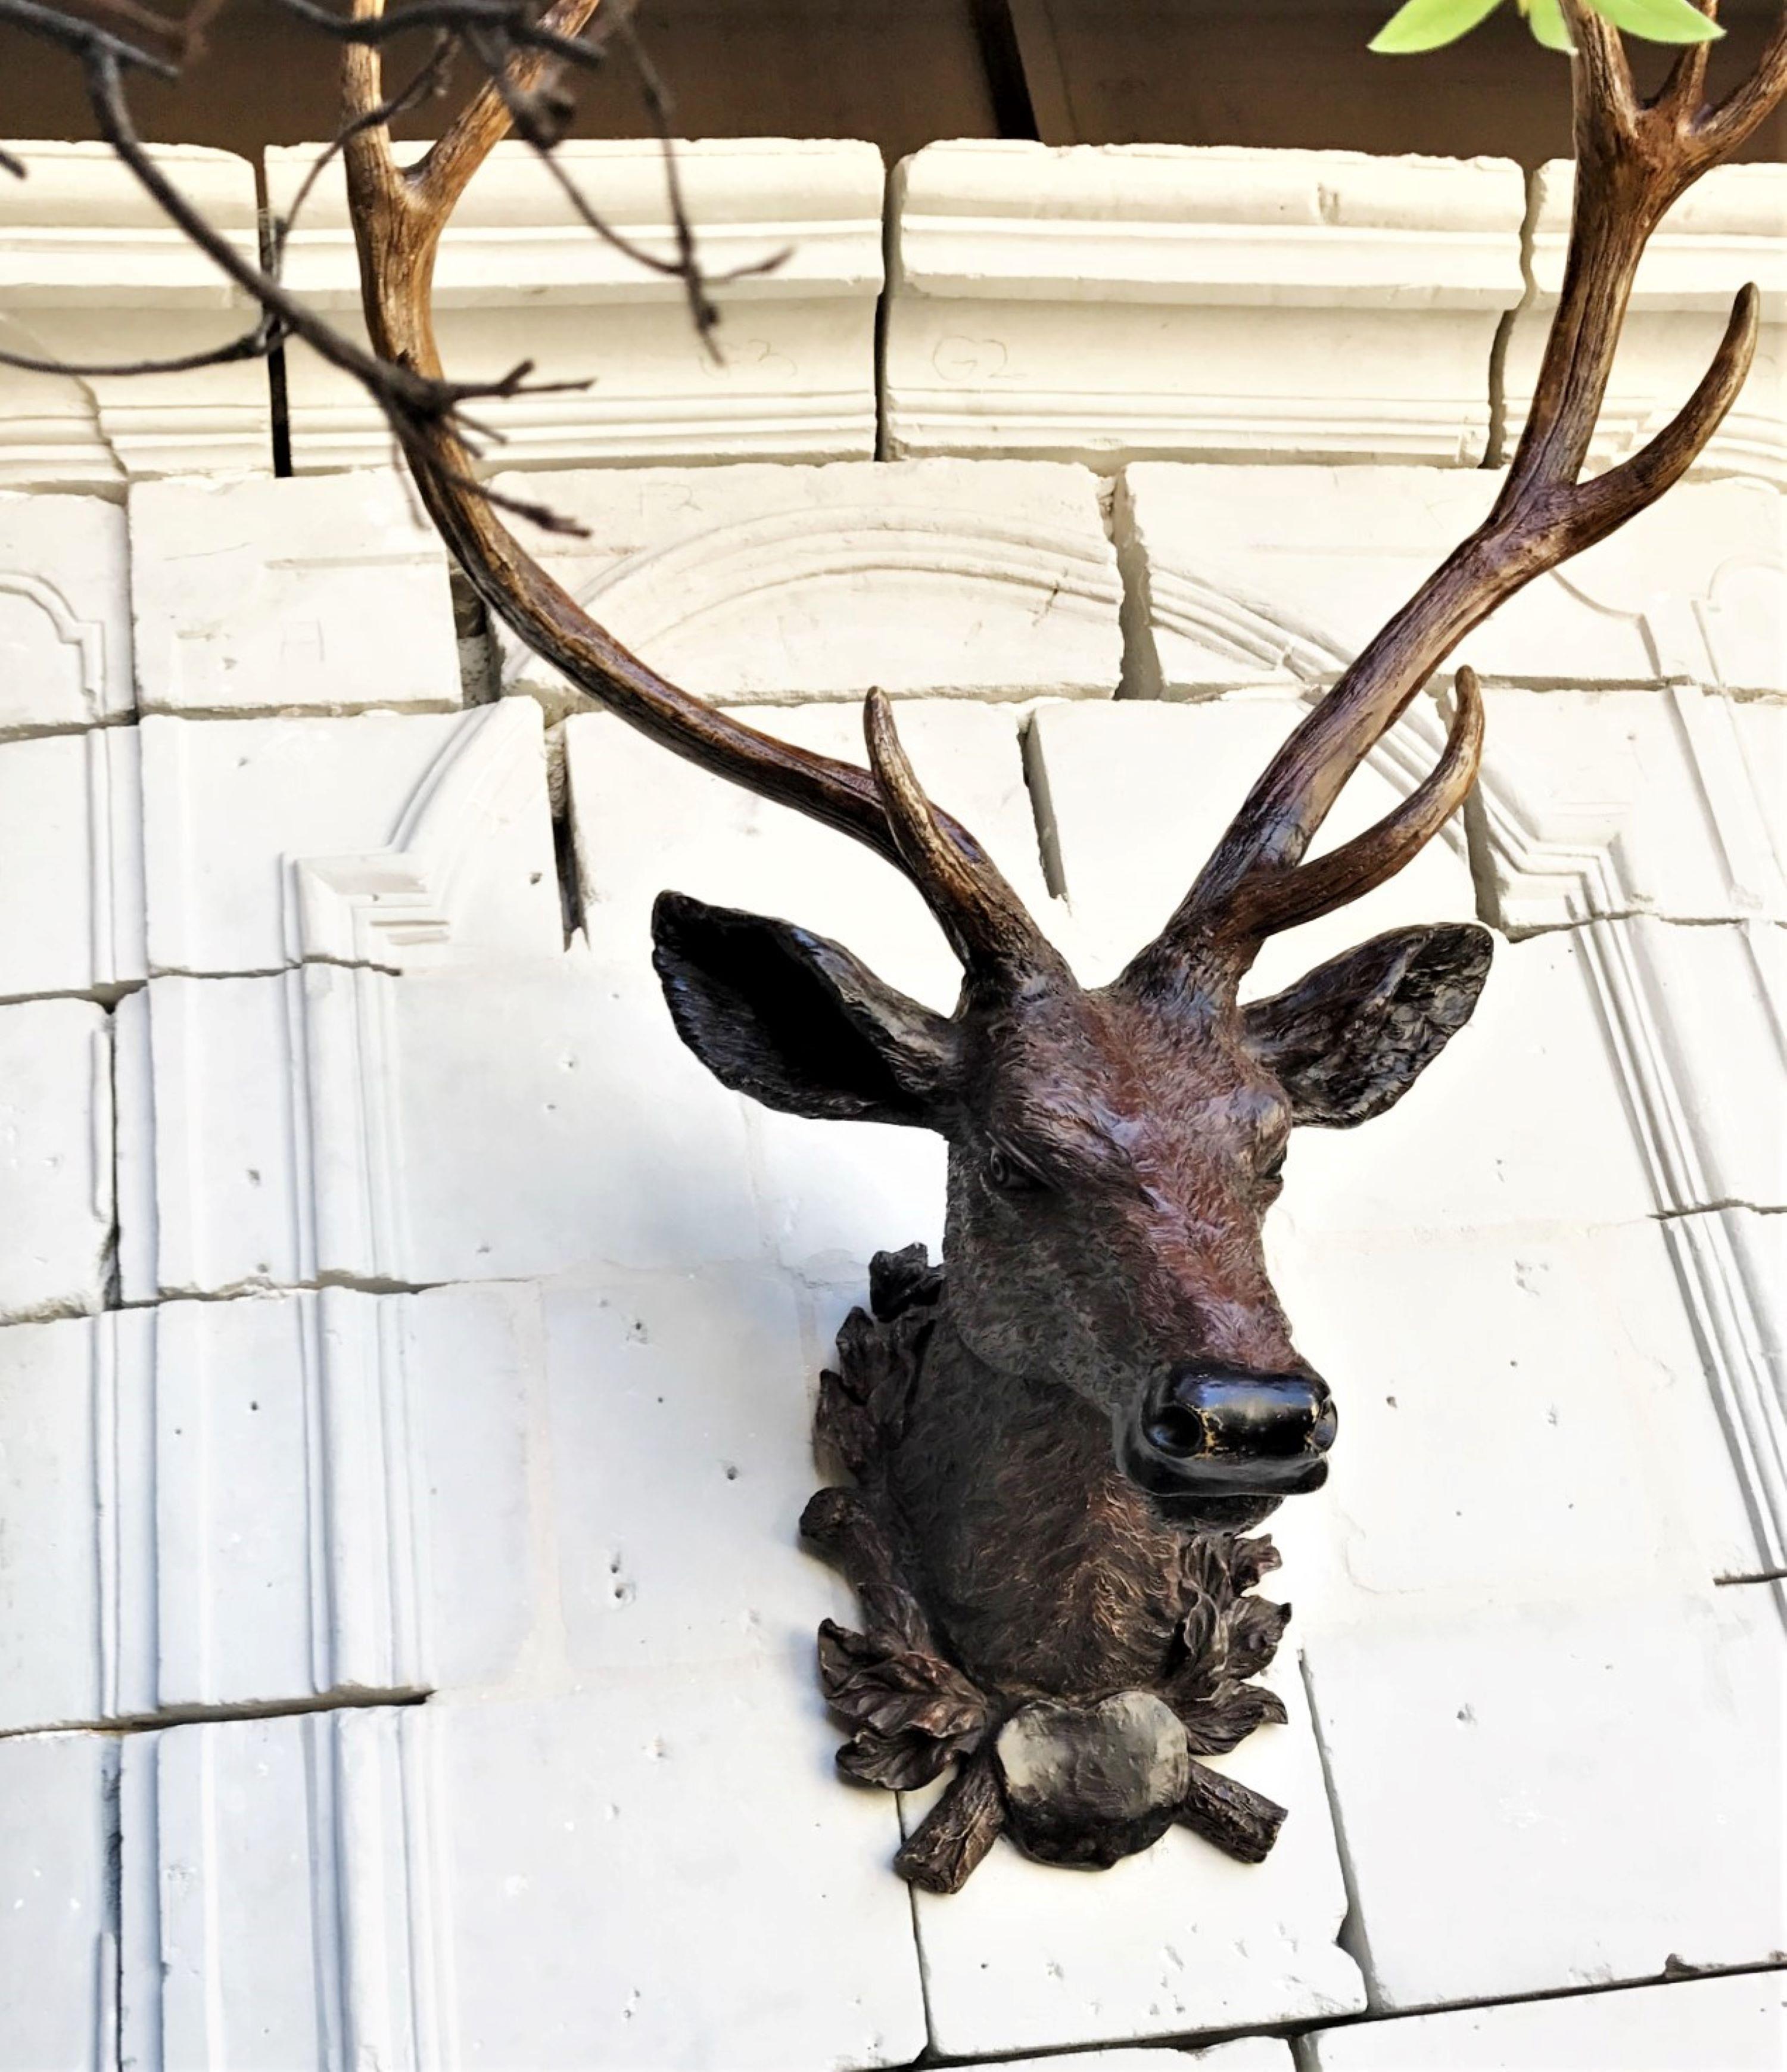 Exceptional 19th century Black Forest stag head from a Chateau de Chasse. Germany.
The Black Forest (German: Schwarzwald, is a large forested mountain range in the state of Baden-Württemberg in southwest Germany. It is bounded by the Rhine valley to